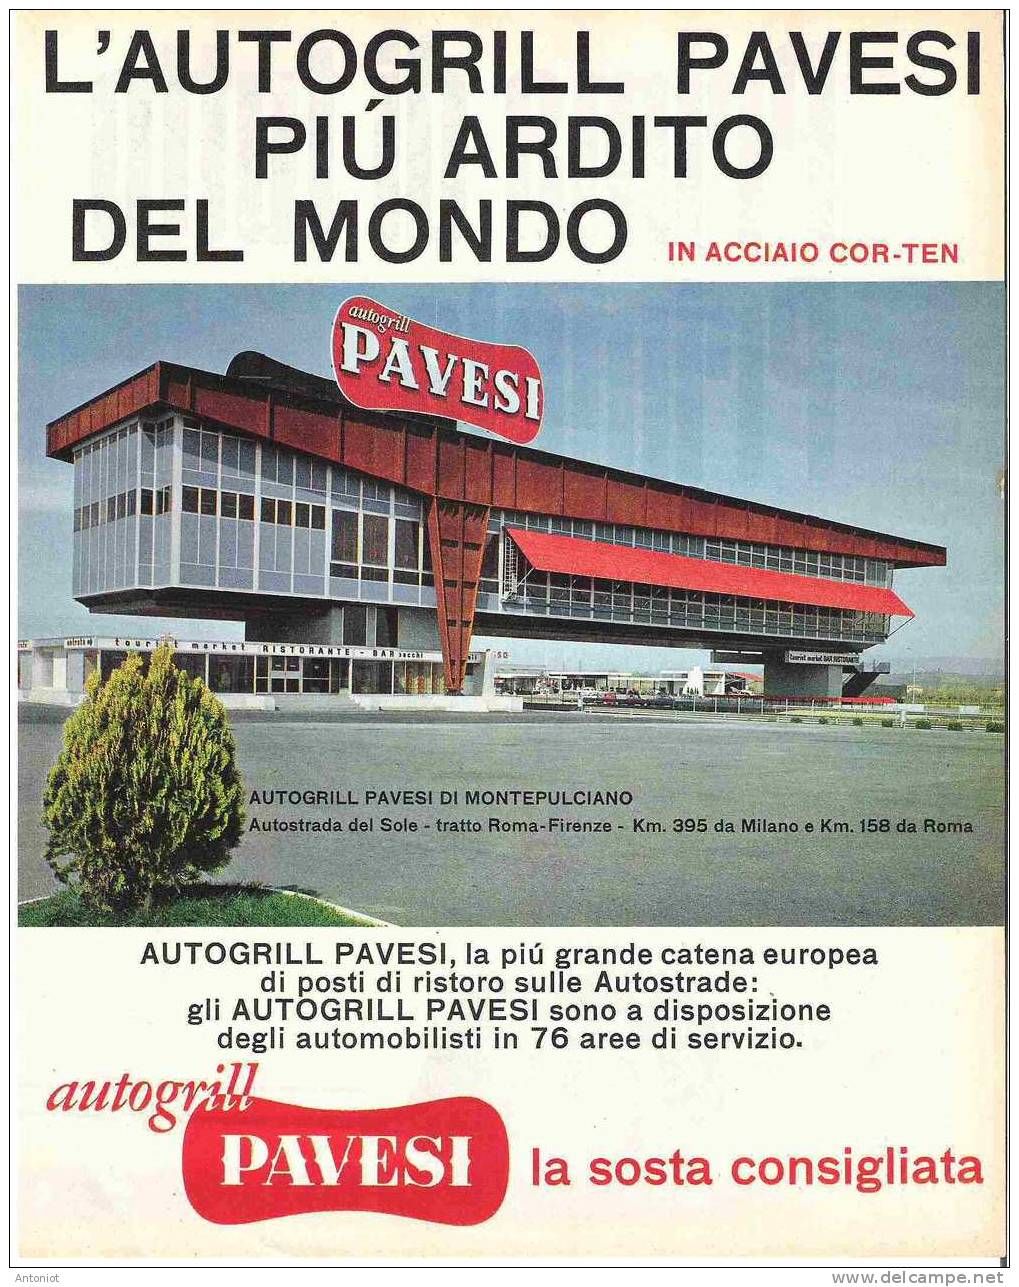 Pavesi Restaurante- Italy -Autogrill - Atomic and Mid century modern architecture 7371c210